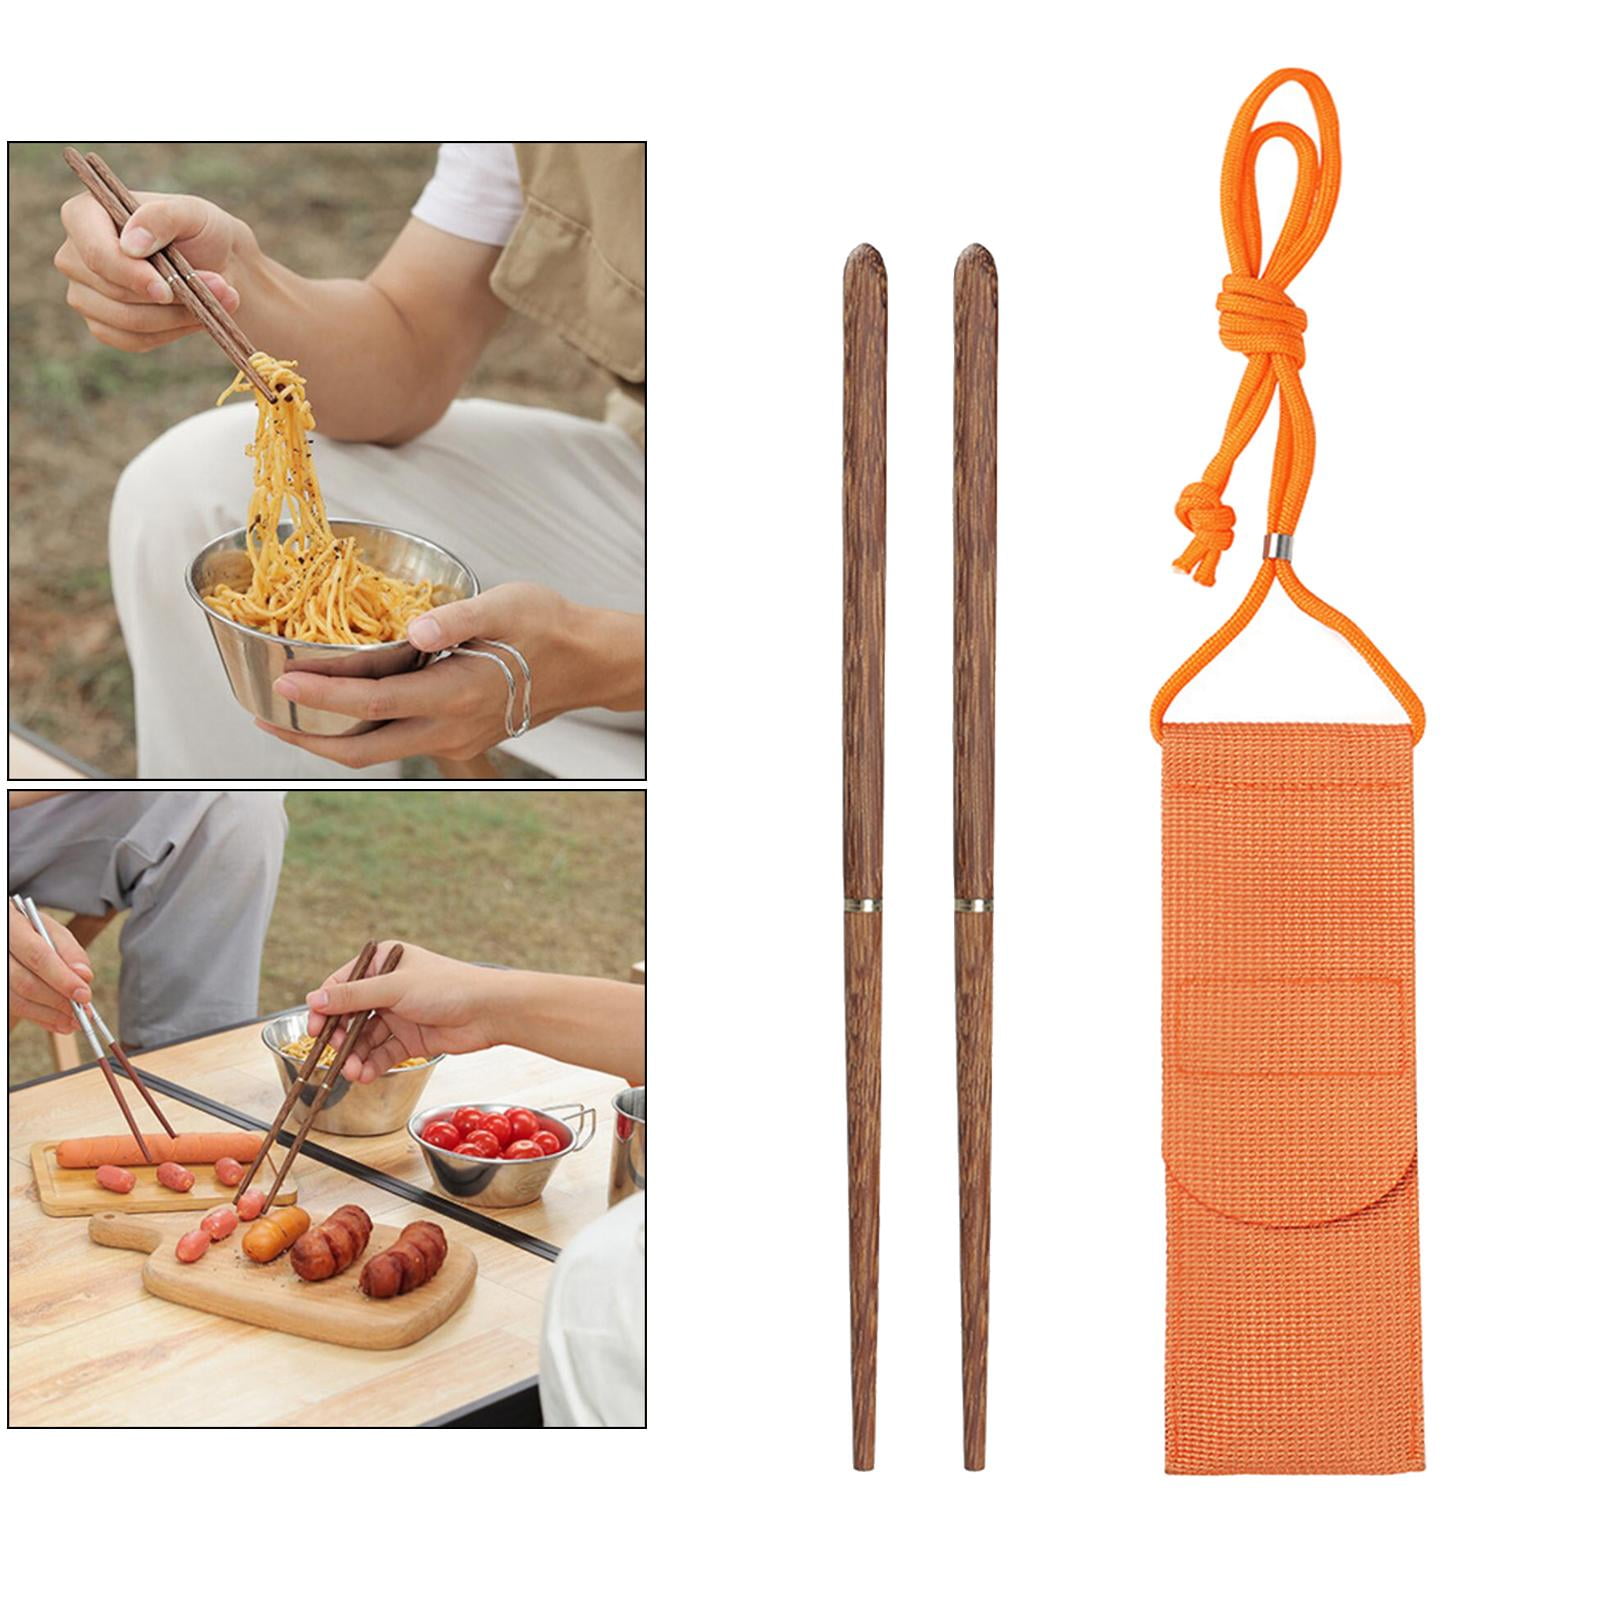 1 Pair Foldable Chopsticks Camping Outdoor Picnic Redwood Cutlery